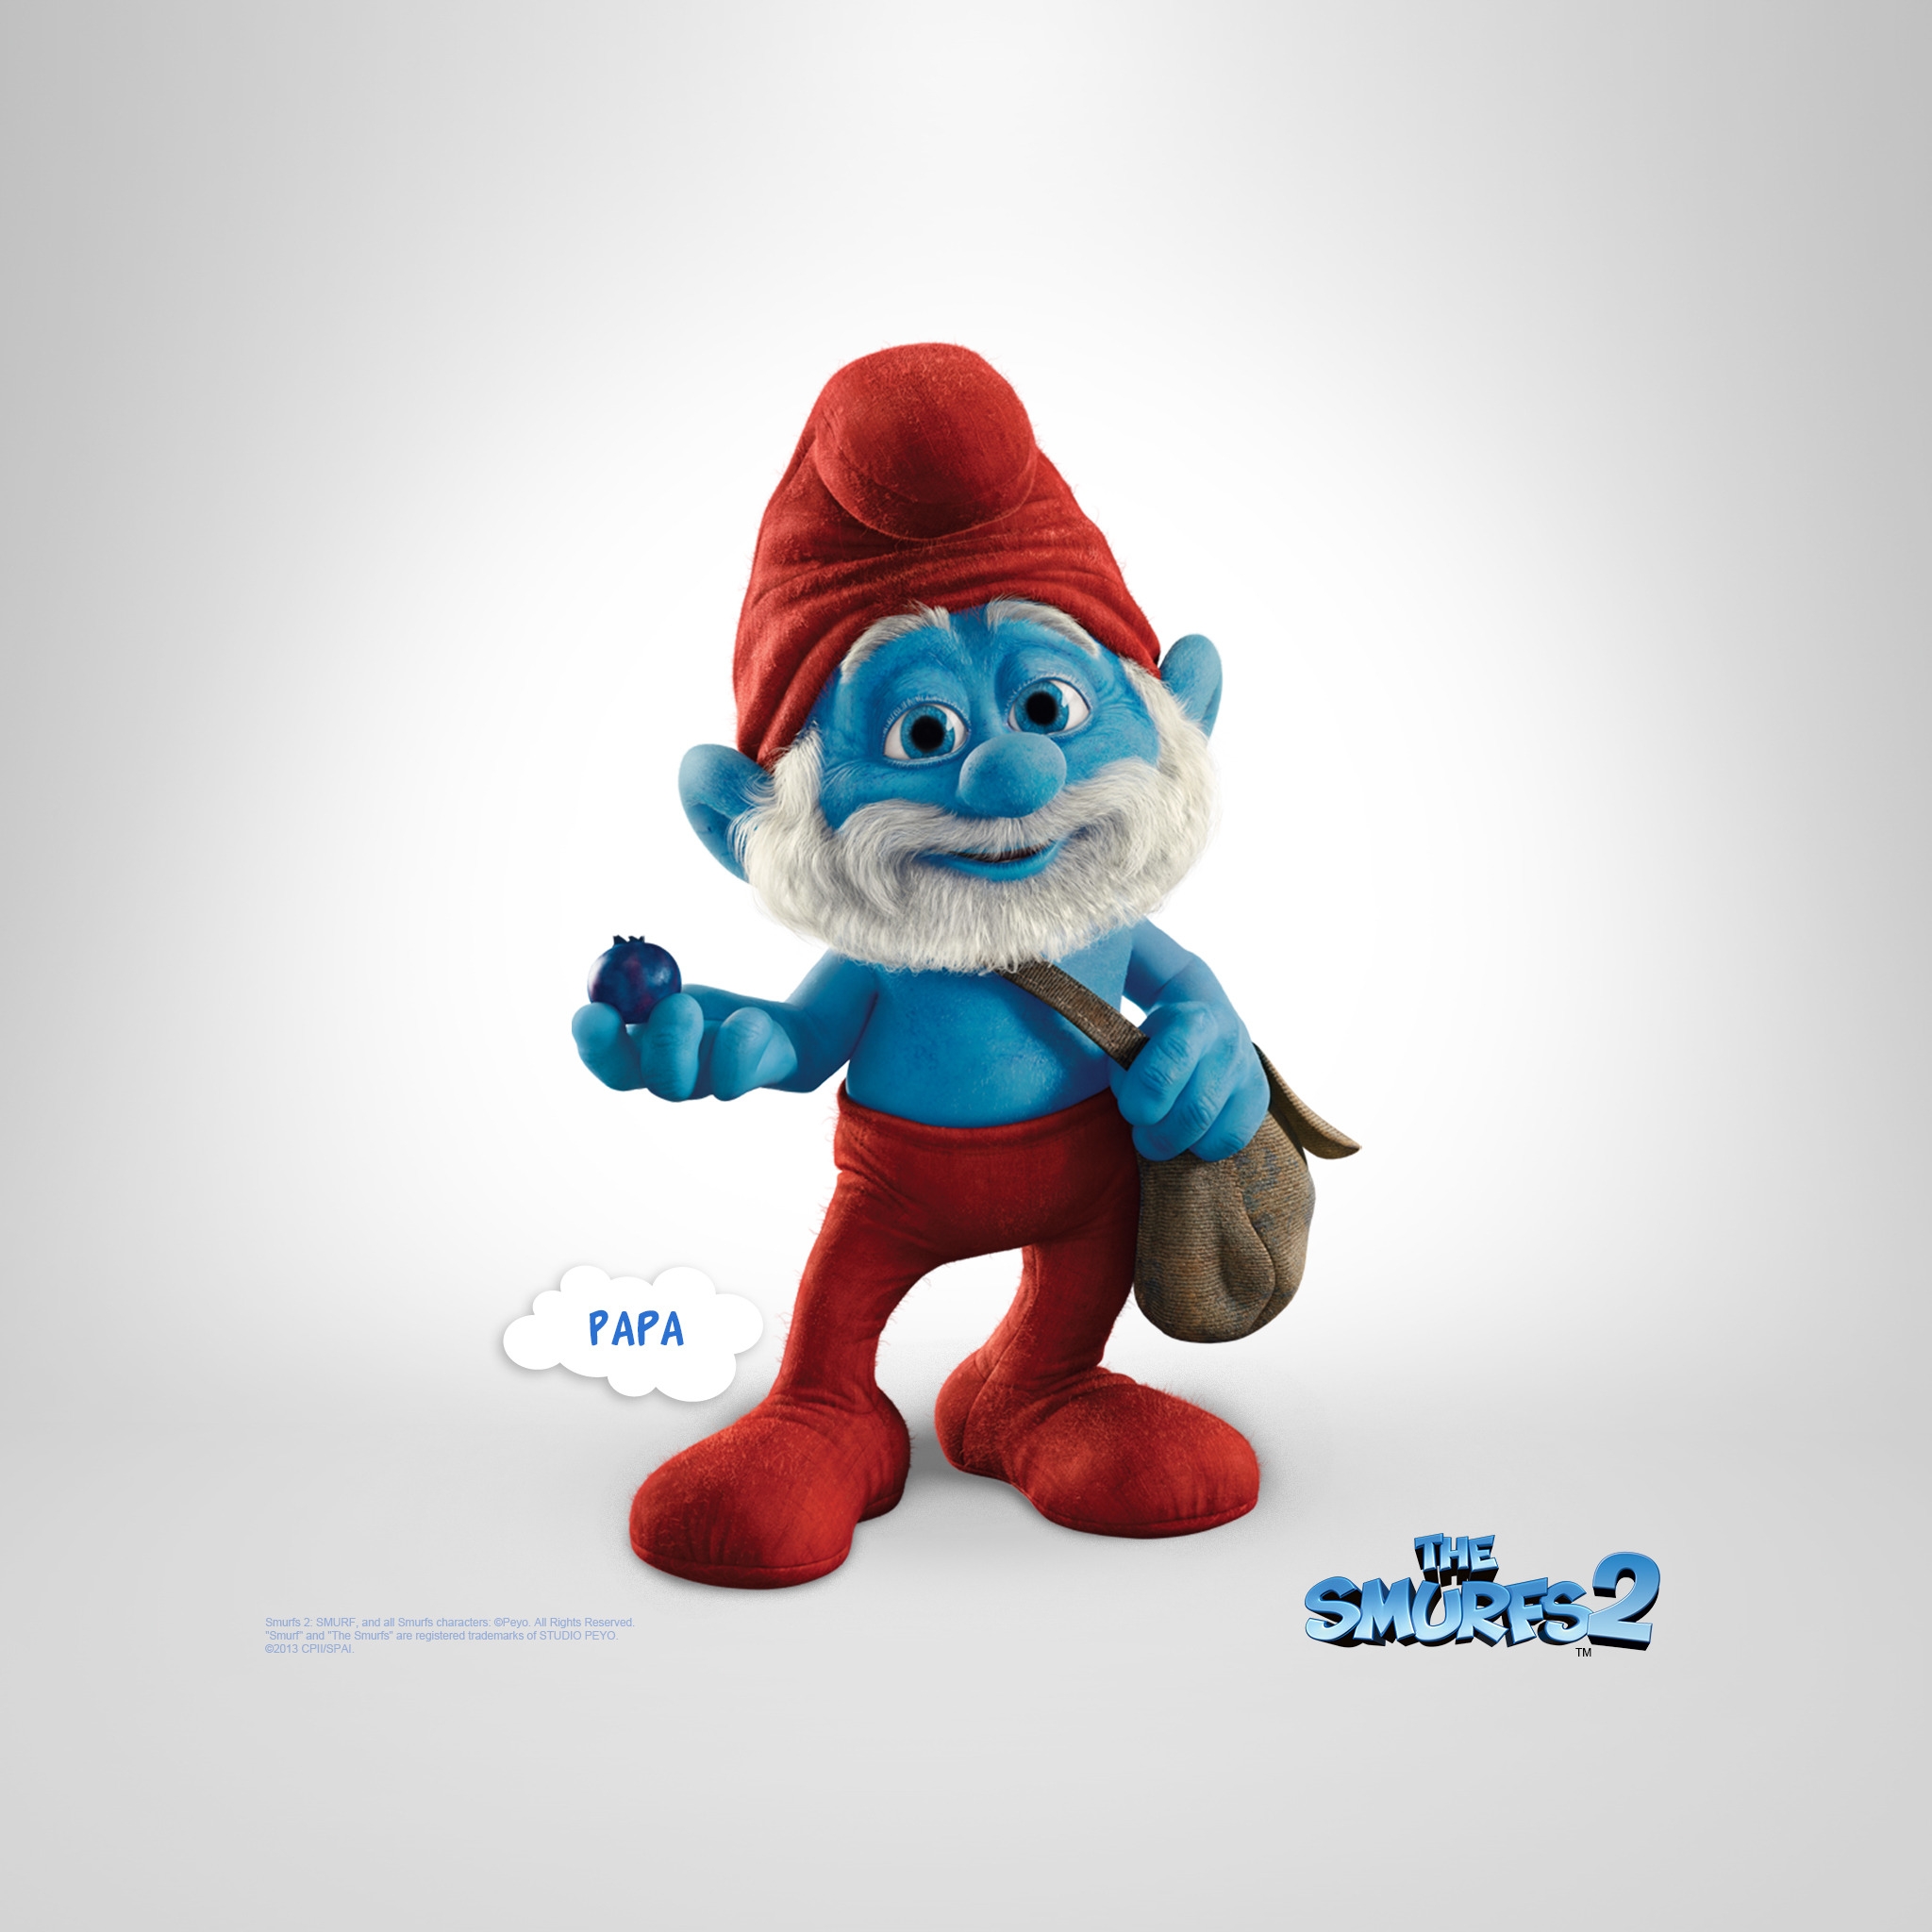 Papa The Smurfs 2 for 2048 x 2048 New iPad resolution